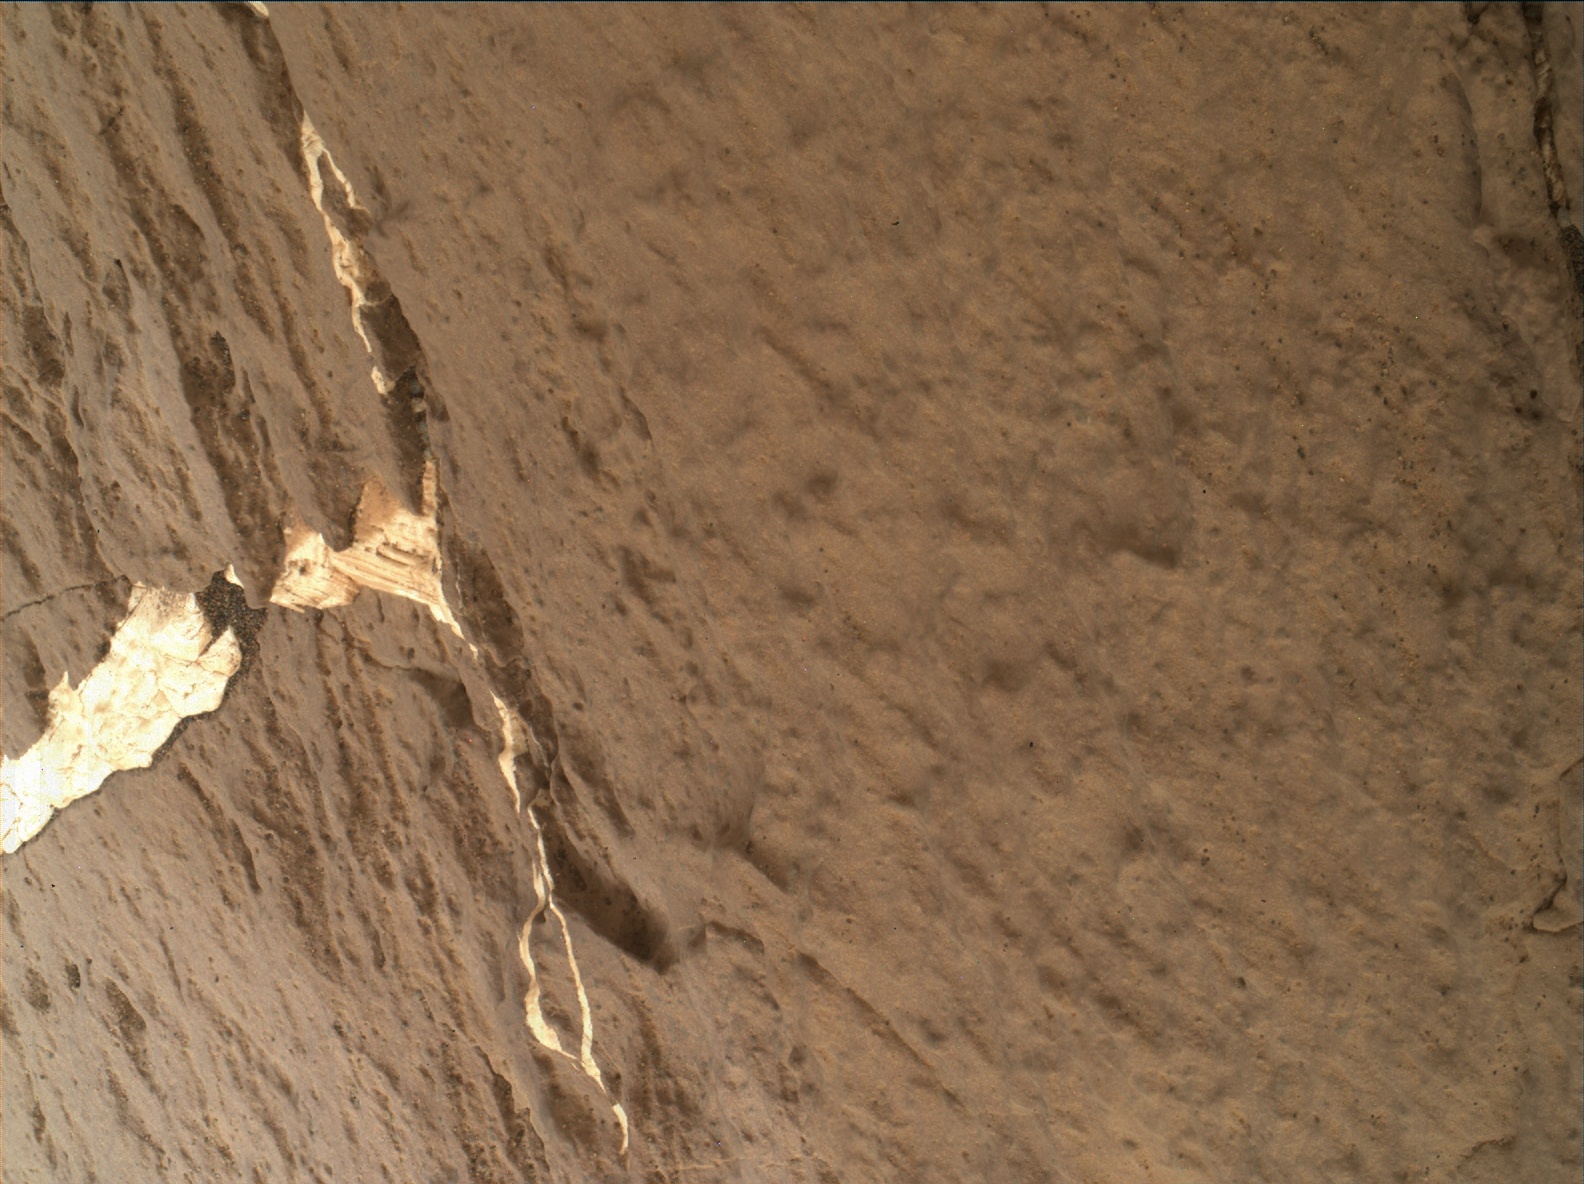 Nasa's Mars rover Curiosity acquired this image using its Mars Hand Lens Imager (MAHLI) on Sol 1504